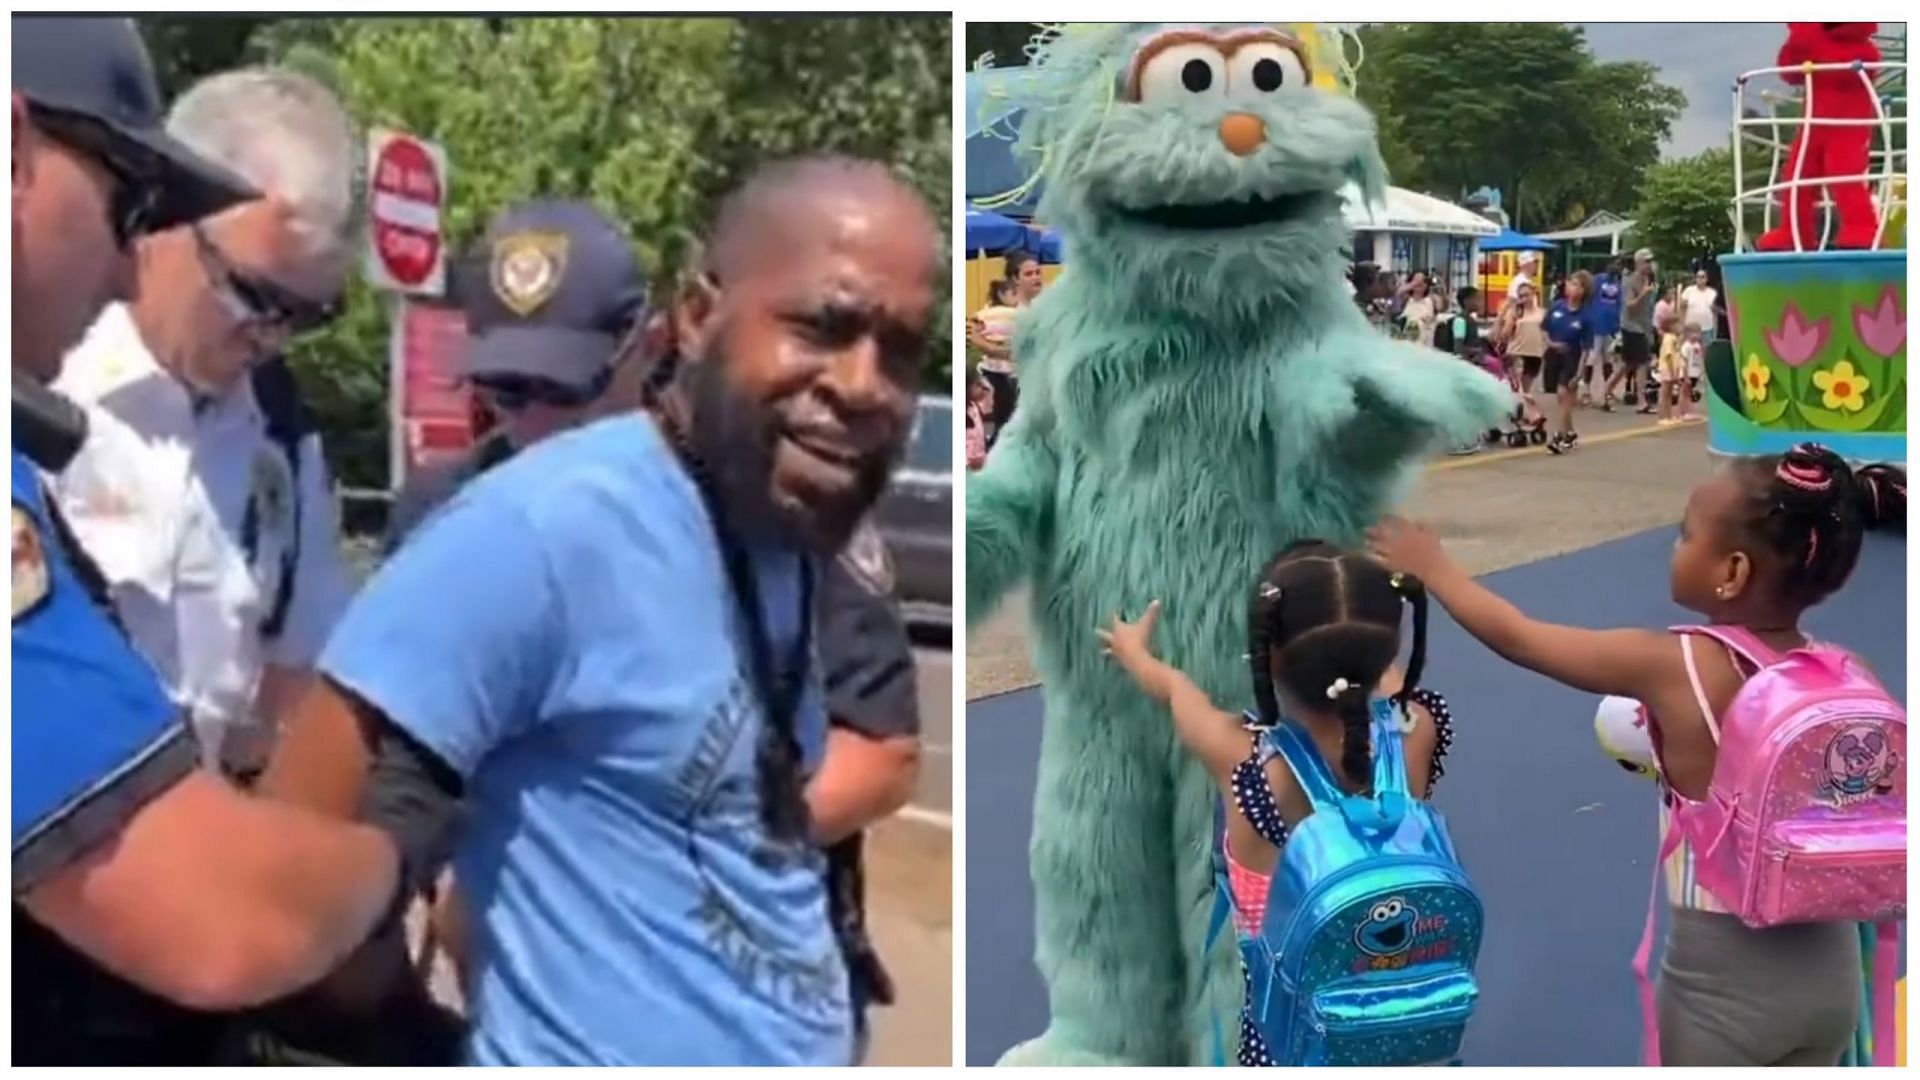 Two men were arrested for protesting outside Sesame Place (Image via Alicia Roberts/Twitter and @_jodi_/Instagram)